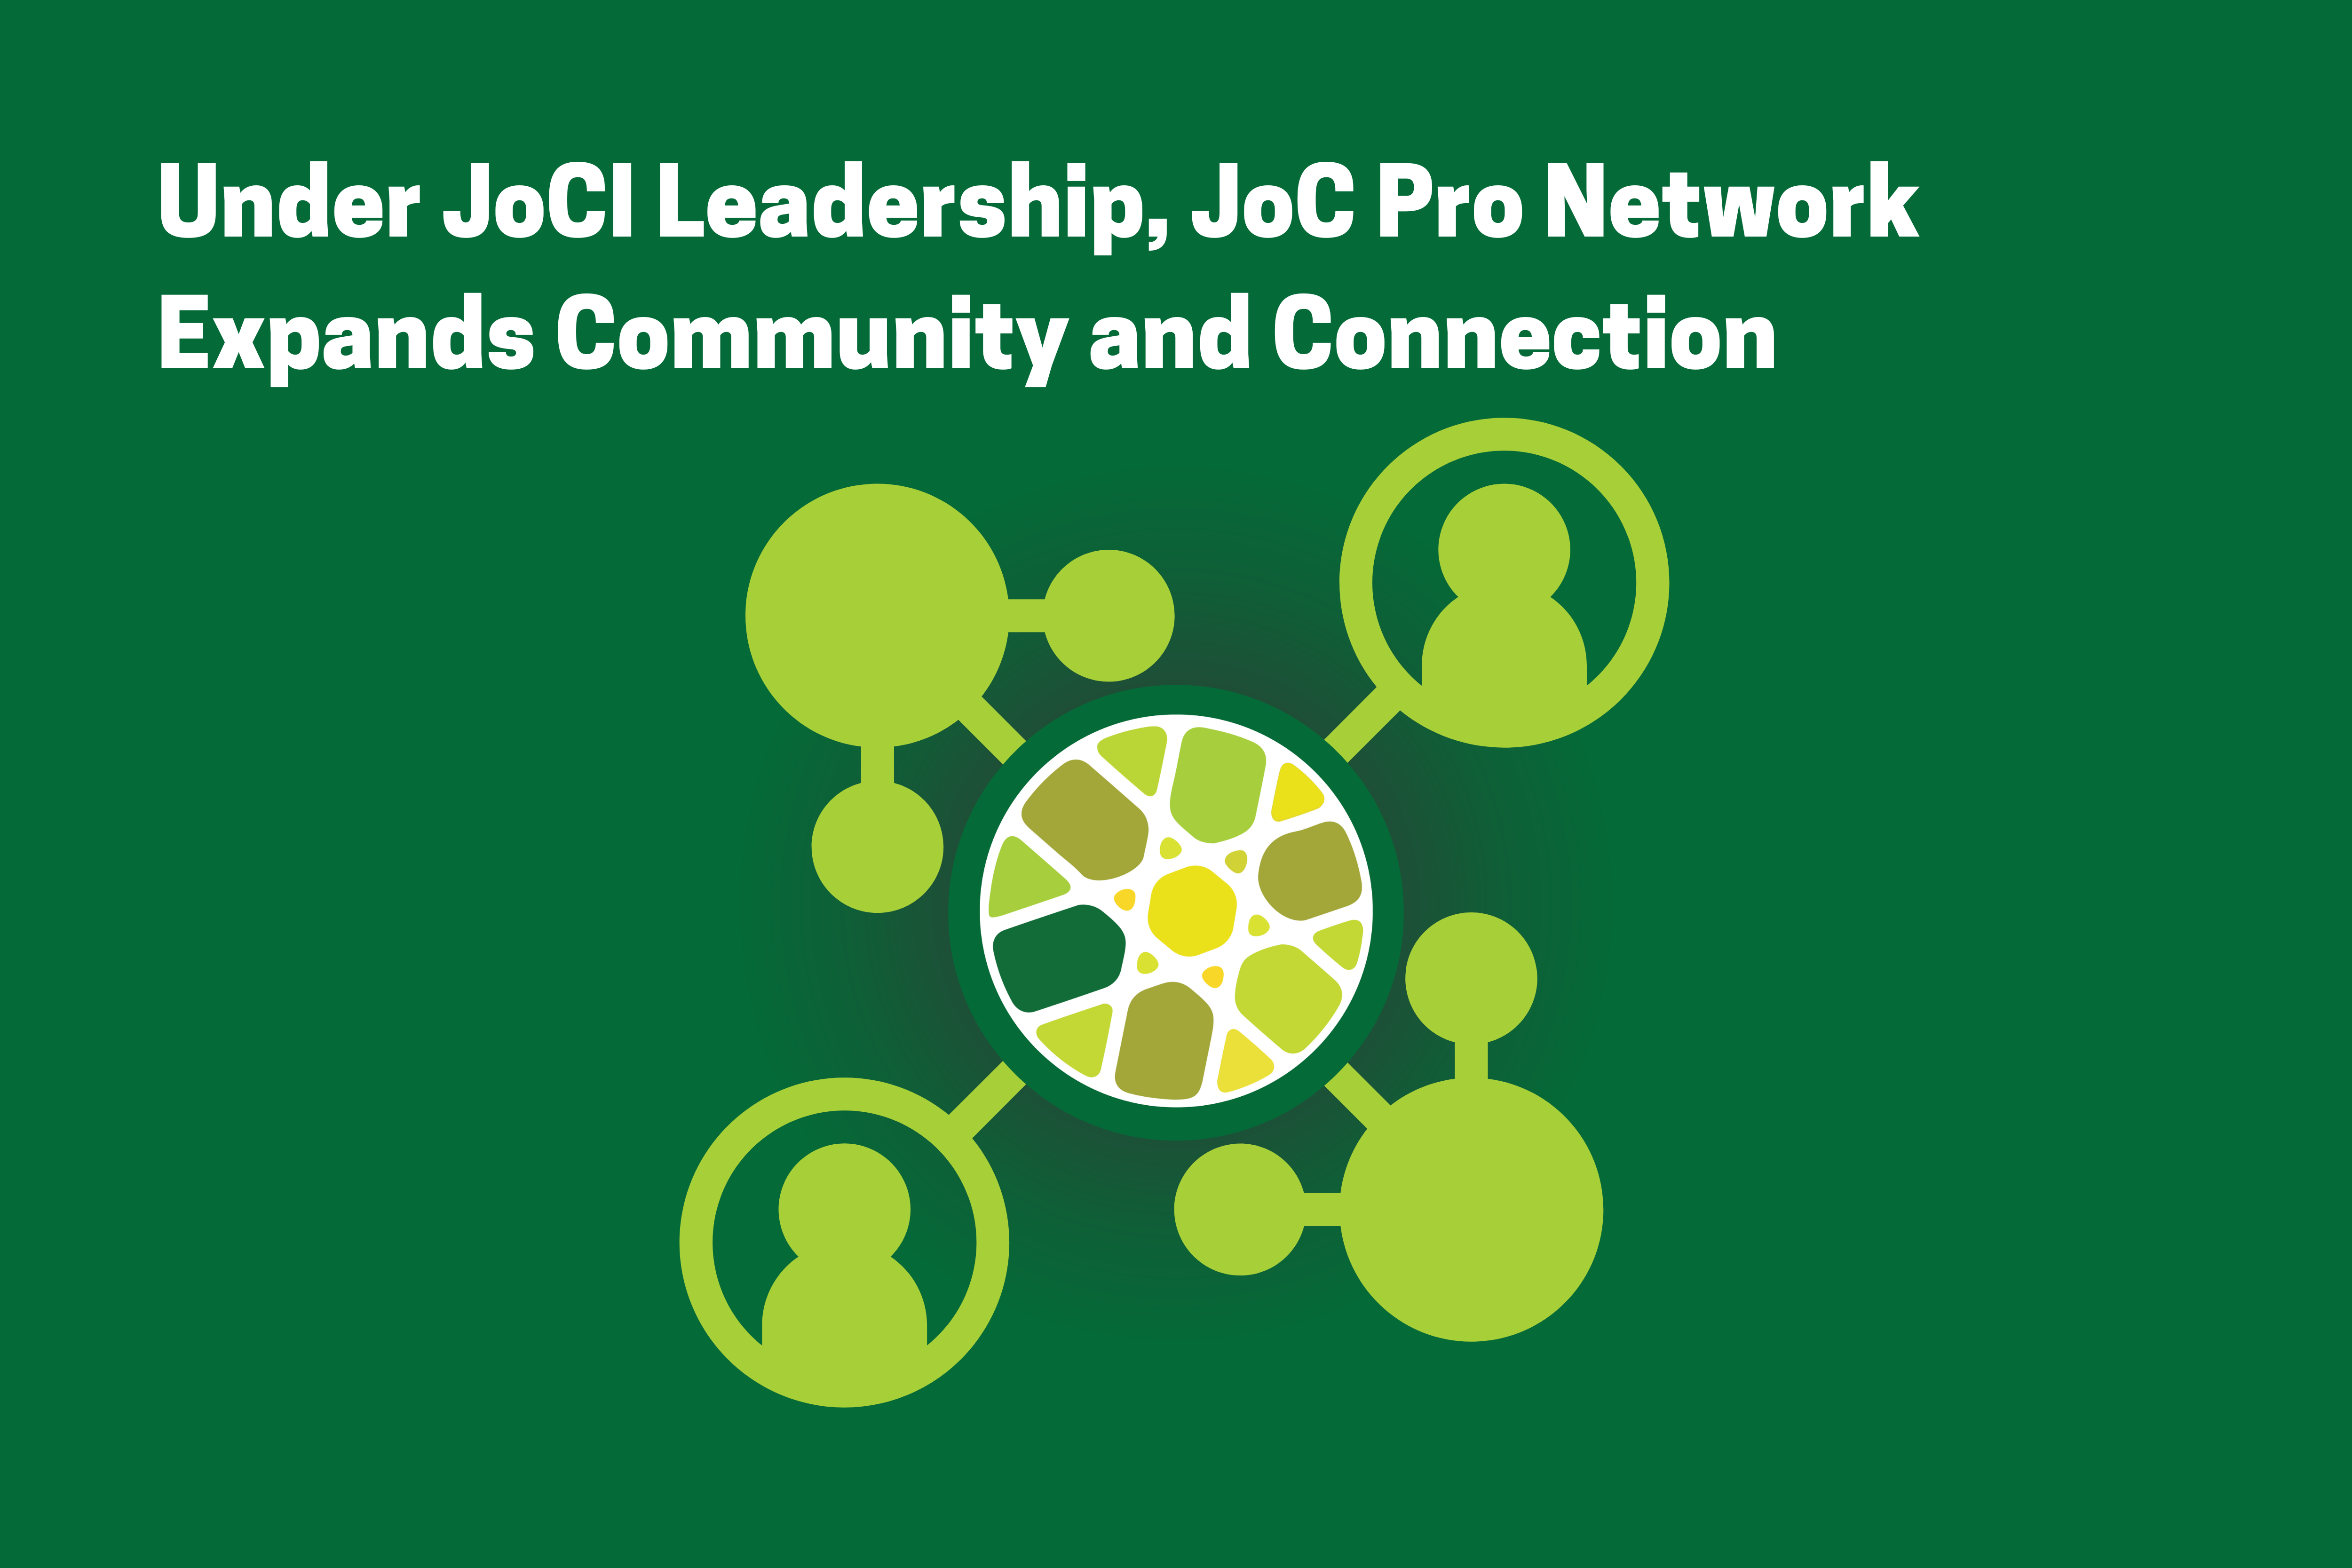 Image shows title and a green graphic depicting networking/connections with JoCI's logo in the middle